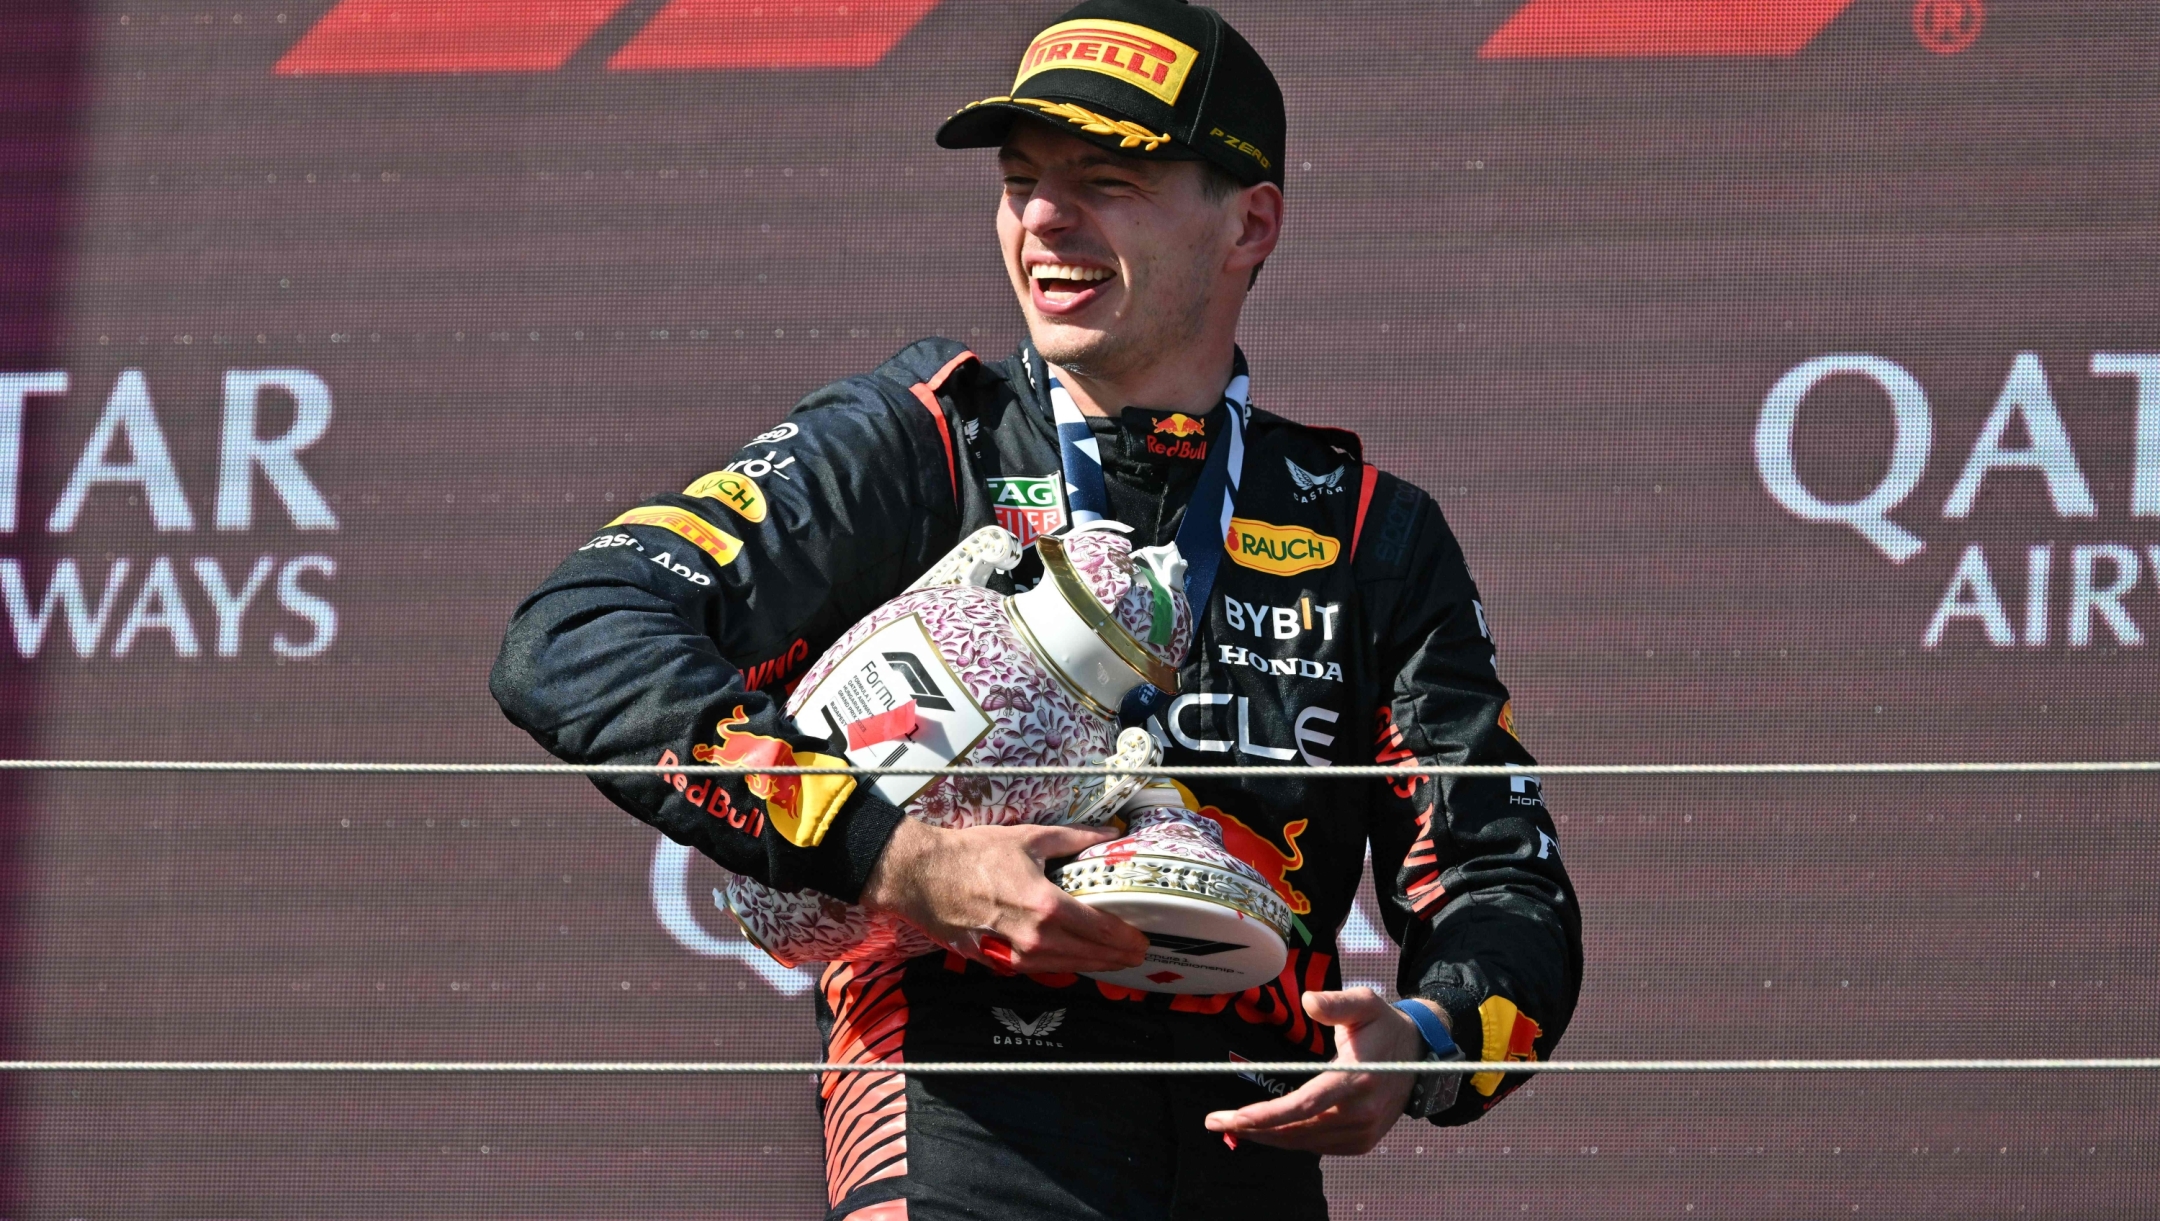 Winner Red Bull Racing's Dutch driver Max Verstappen leaves the podium with his broken trophy after the Formula One Hungarian Grand Prix at the Hungaroring race track in Mogyorod near Budapest on July 23, 2023. (Photo by ATTILA KISBENEDEK / AFP)